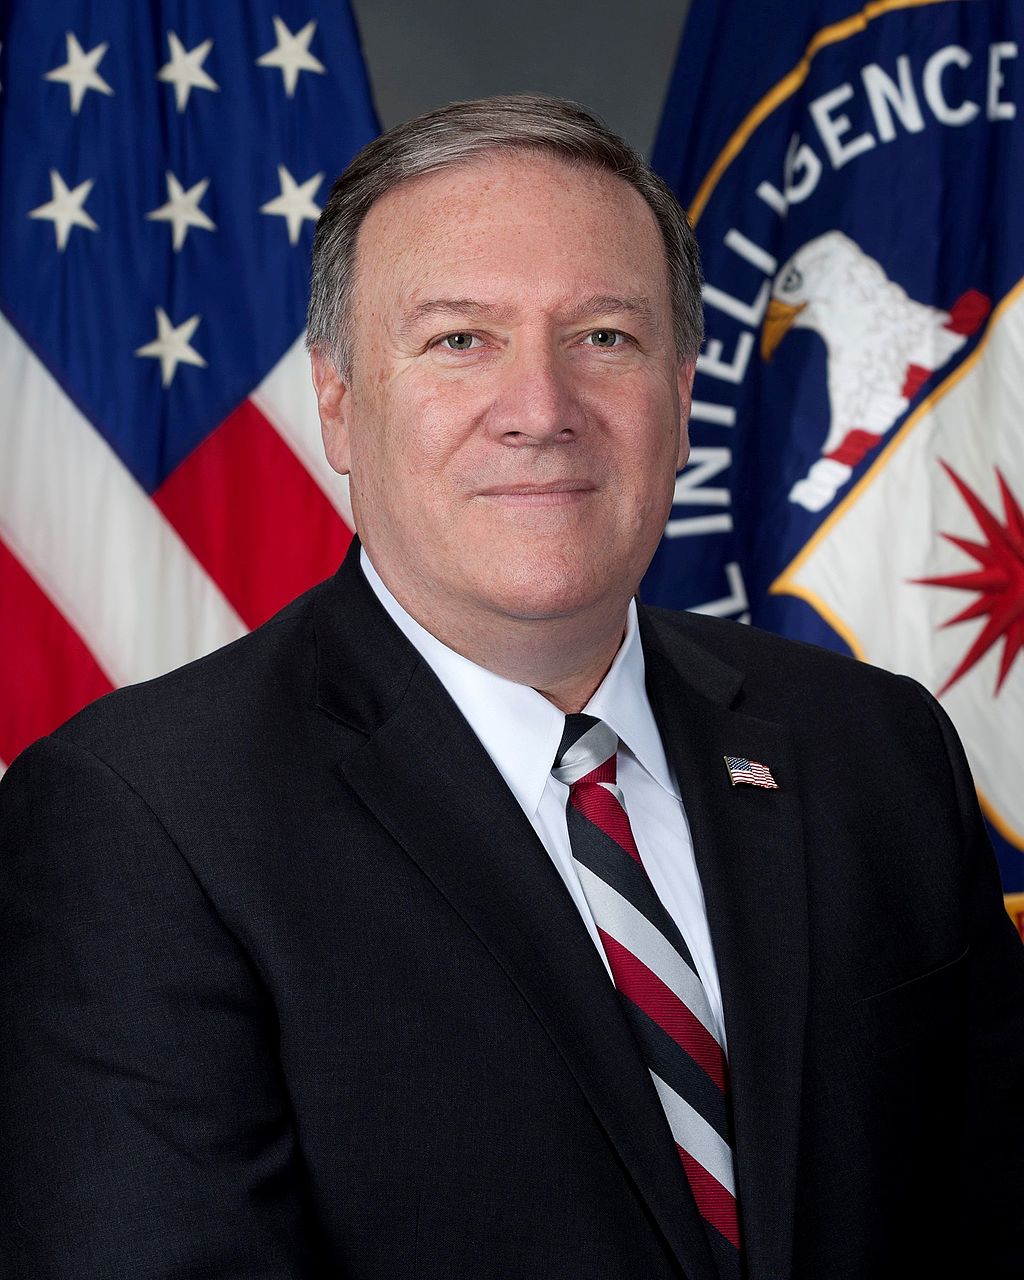 1MikePompeo